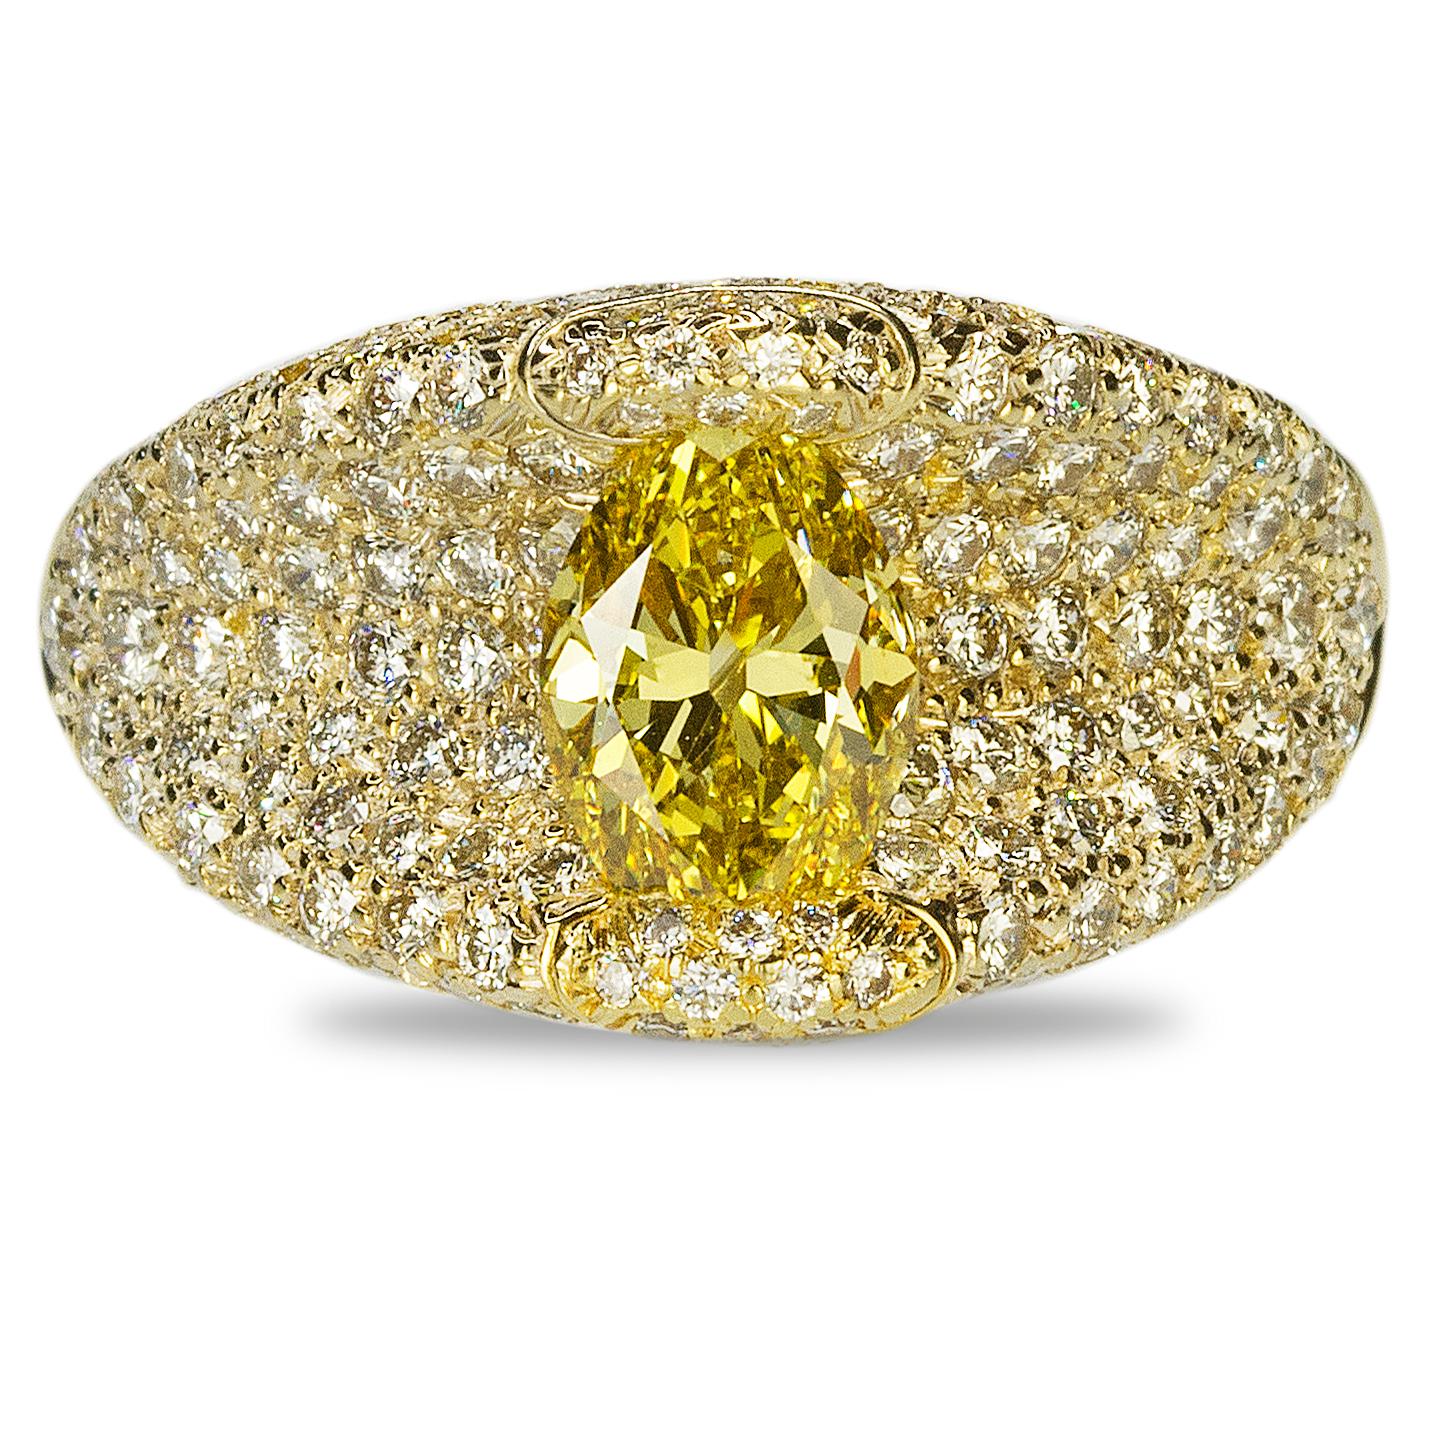 This Henry Dunay Ring might be the most beautiful piece of jewelry ever created. Front and center is a GIA certified Fancy Vivid Yellow, VVS1 clarity oval diamond weighing 1.47 carats and 188 round diamionds weighing approximately 3,50 carats. 